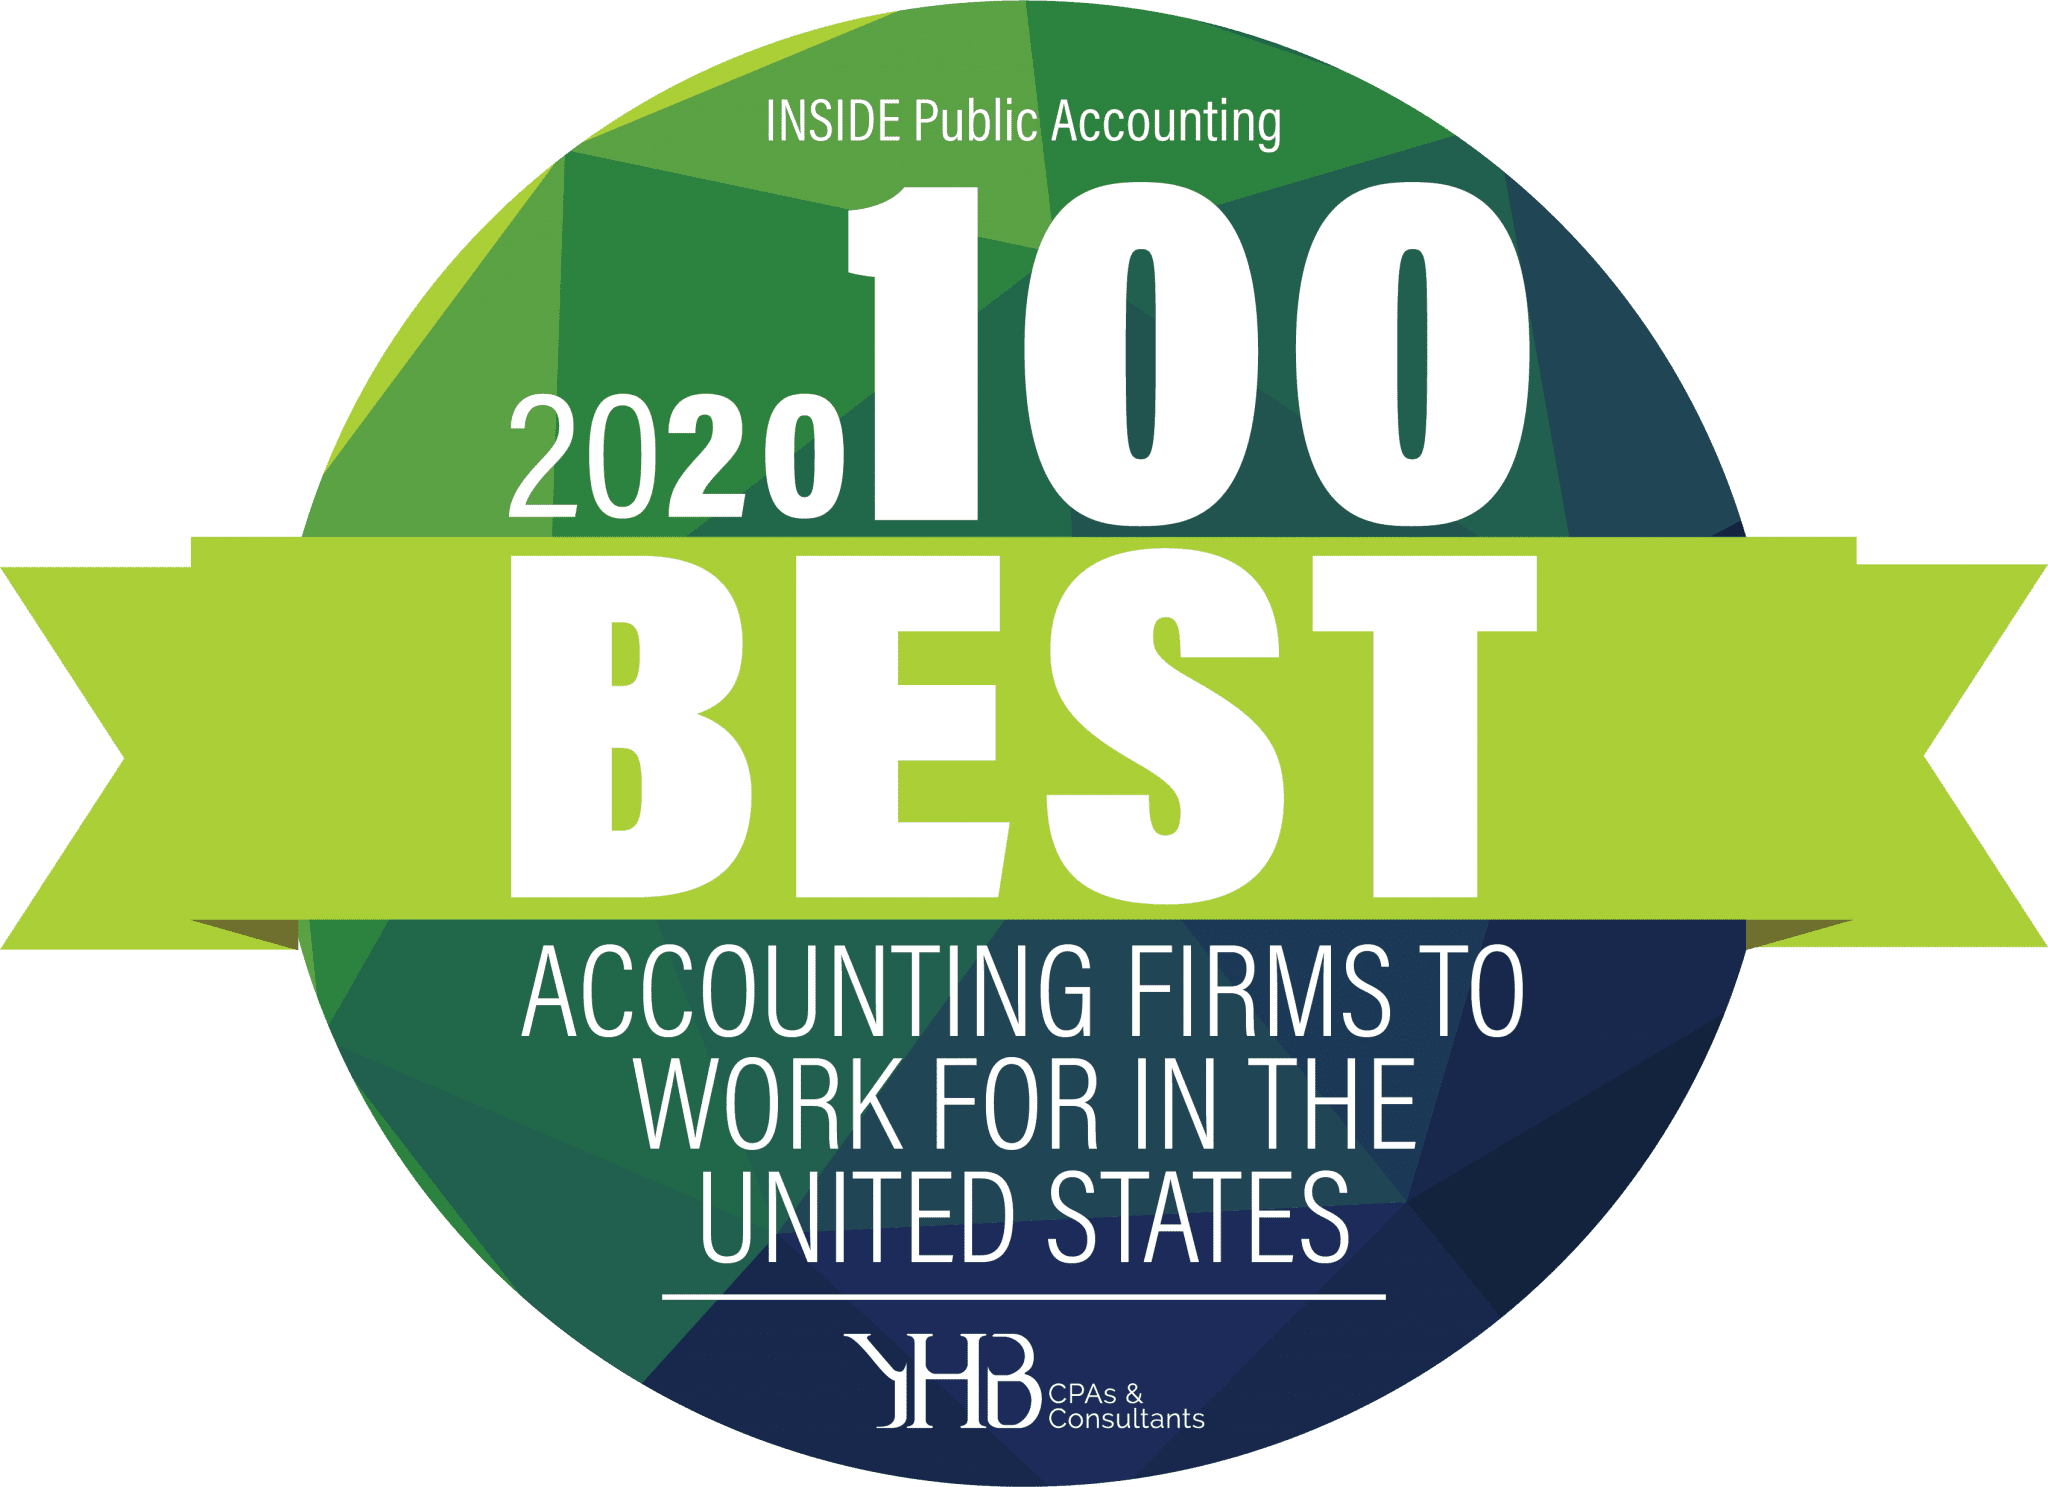 YHB Makes 2020 Best Accounting Firms to Work for List